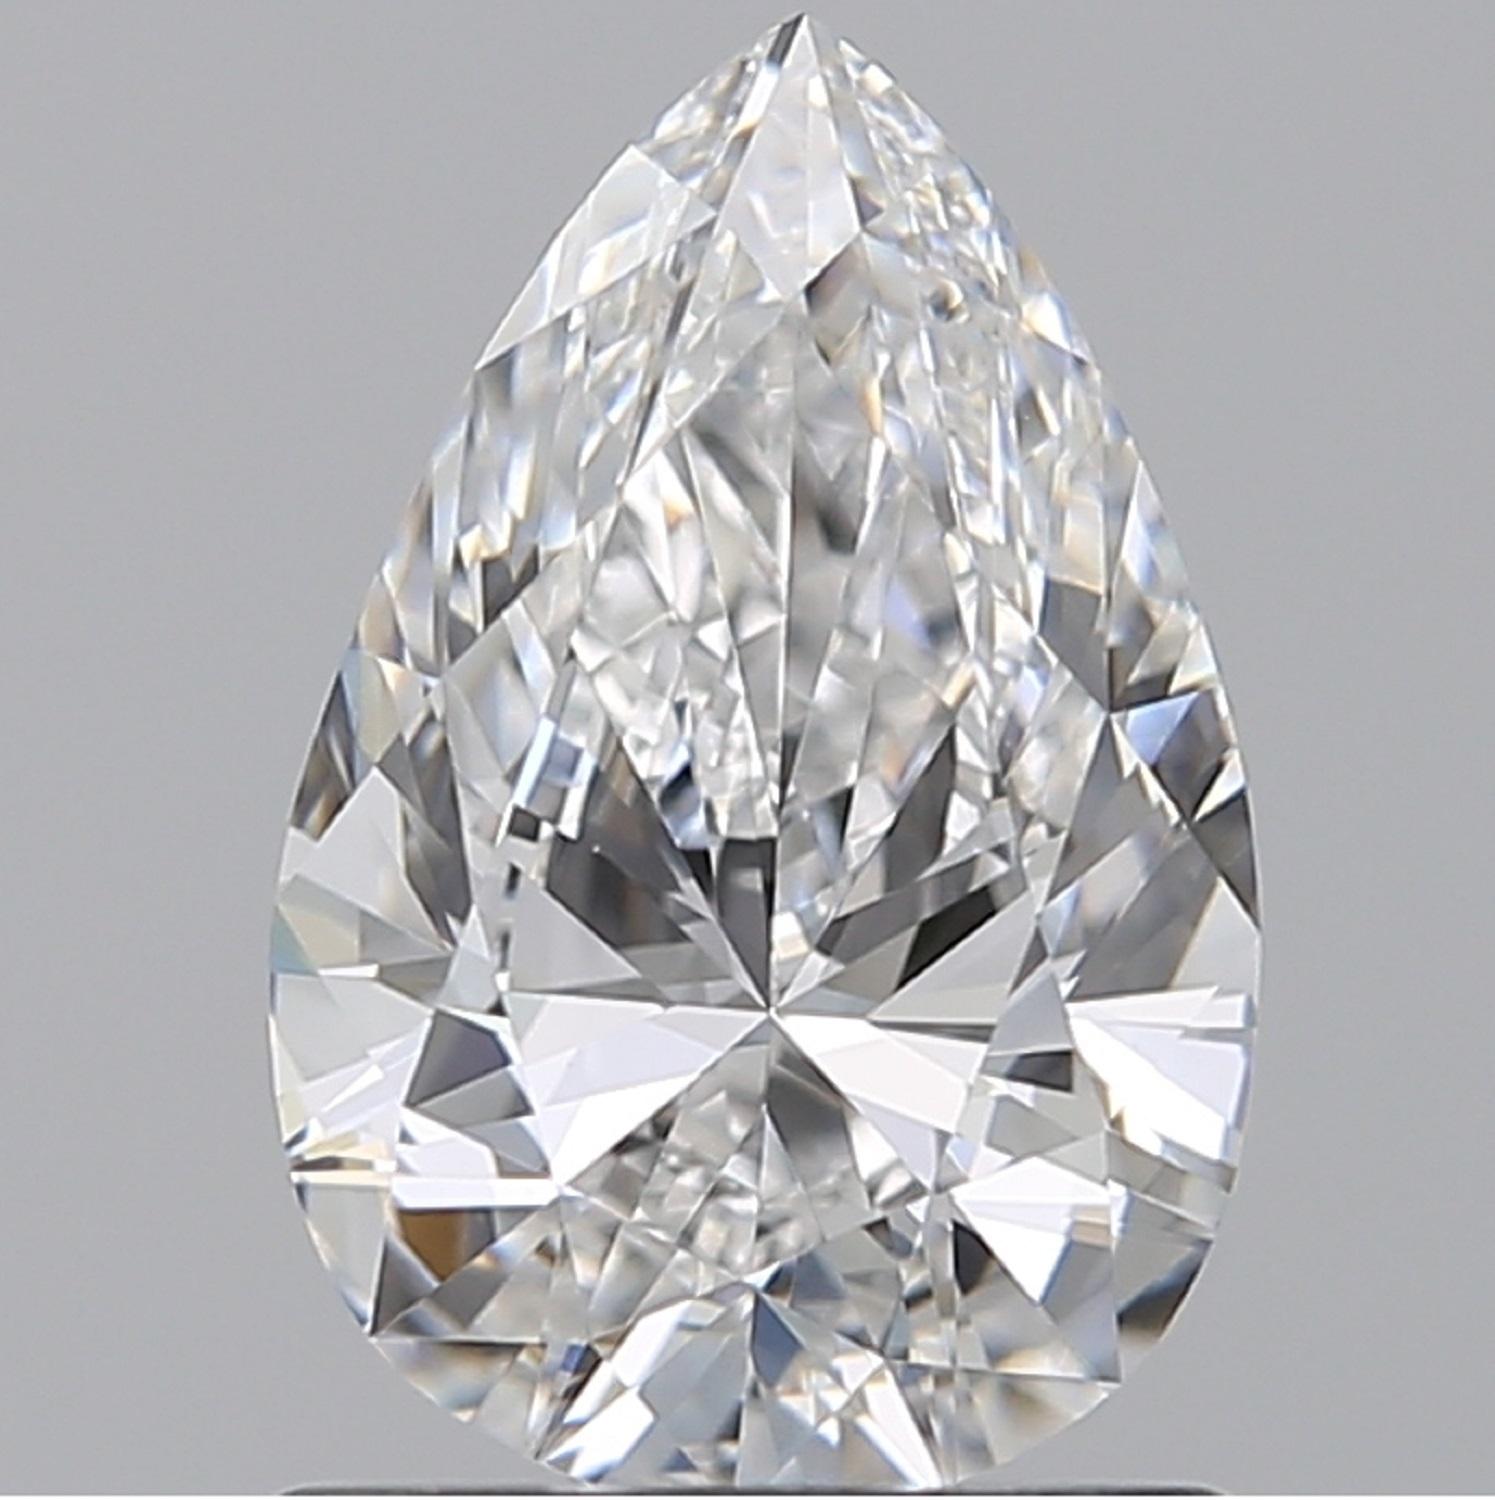 This stunning 1.80 carat matched pair of pear cut diamonds offers vibrant sparkle, a completely eye clean appearance, bright white color, and a glamorous cut! They are each individually certified by GIA, the world’s premier gemological authority.